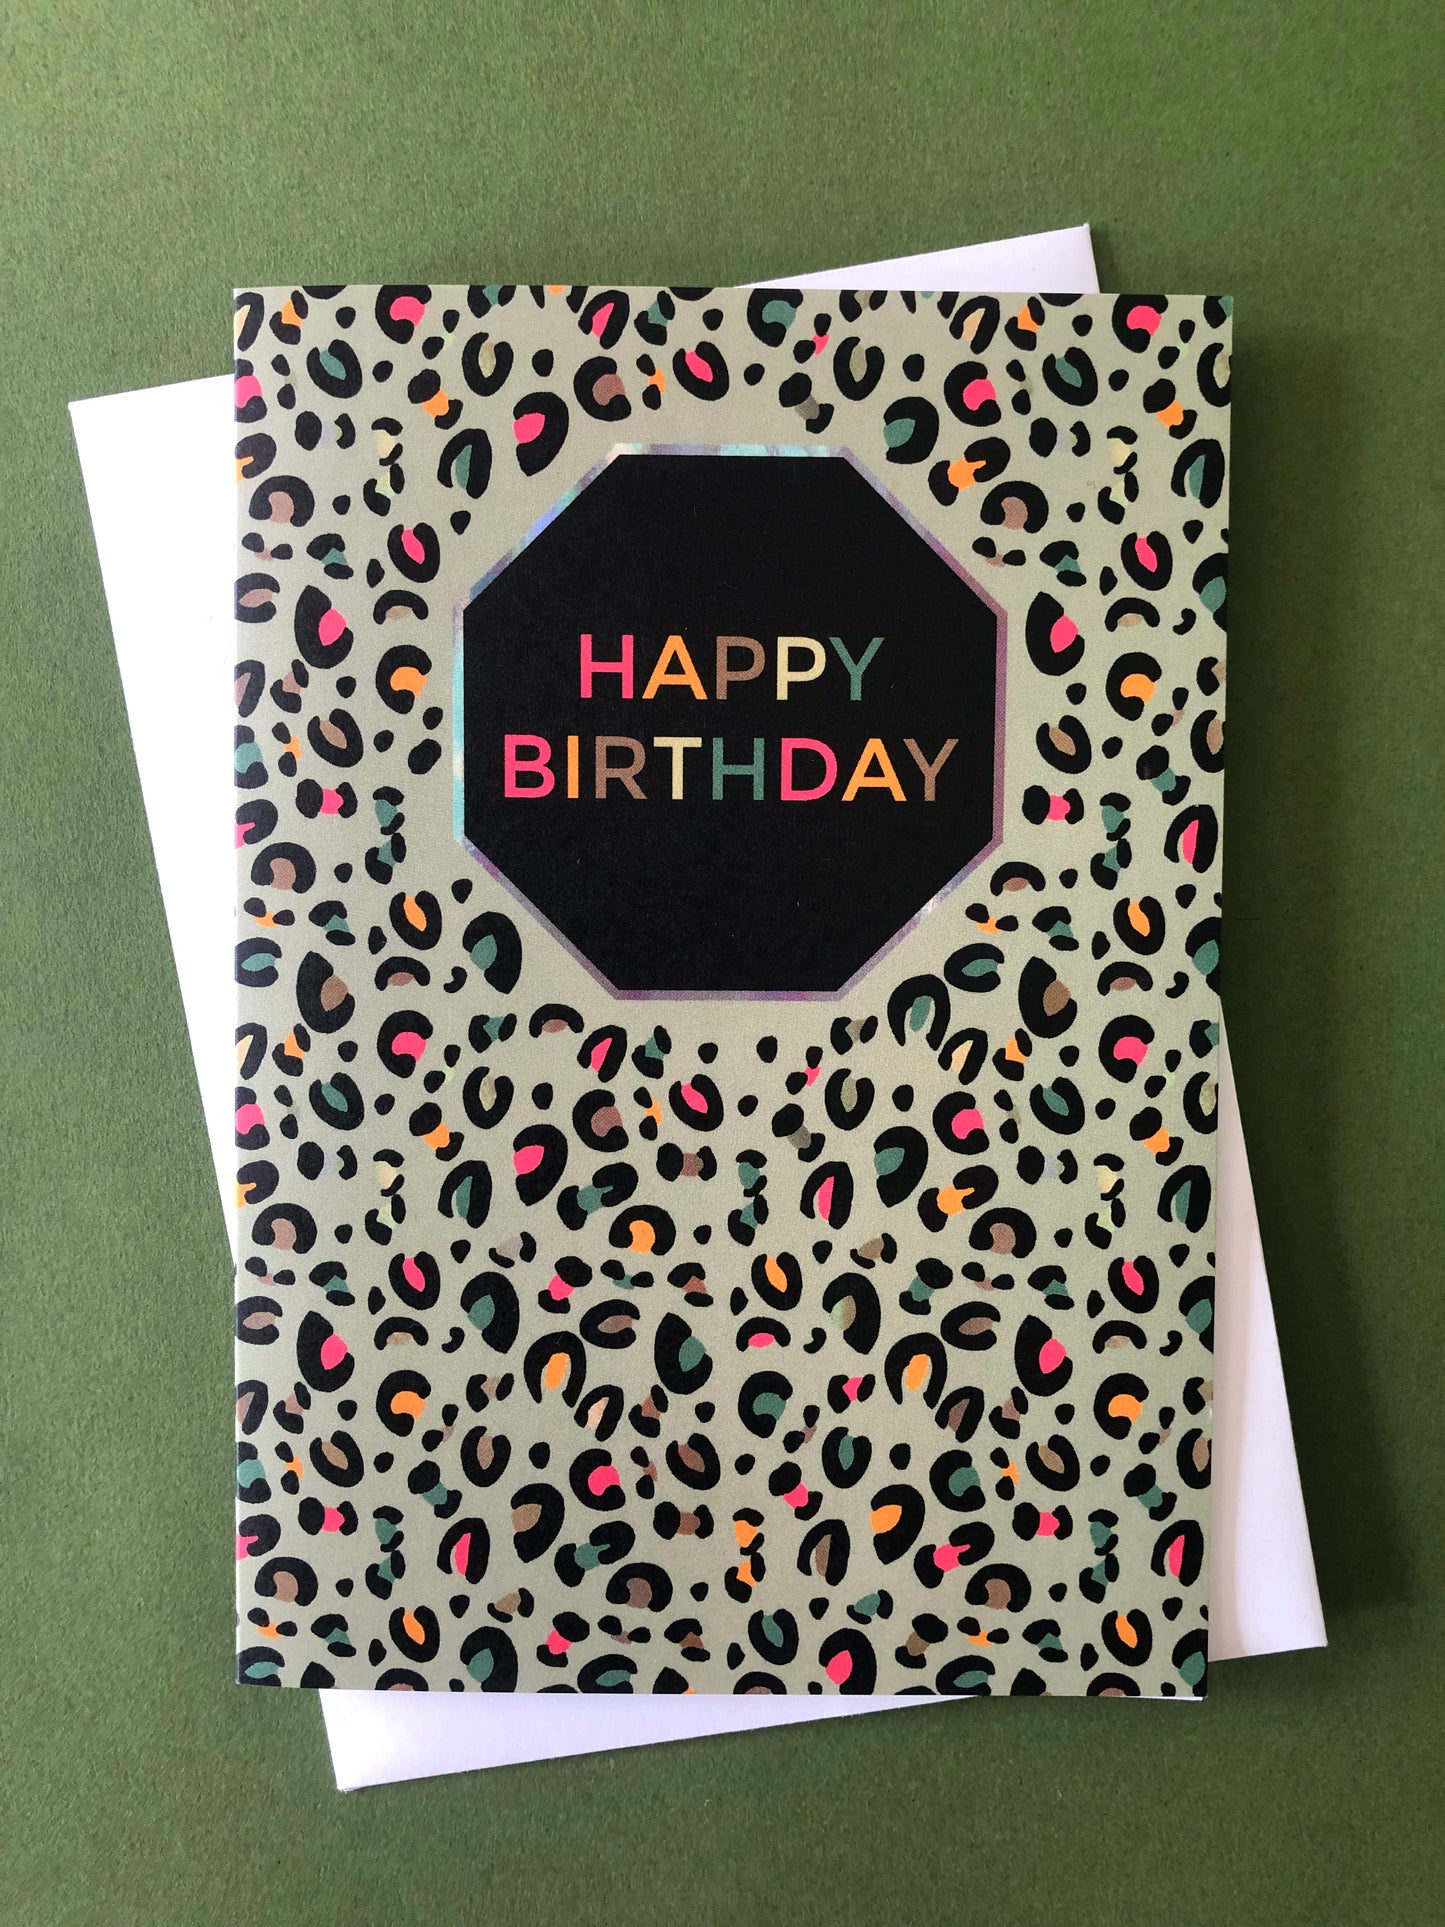 Fun Happy Birthday card with pale green leopard print and pops of neon.